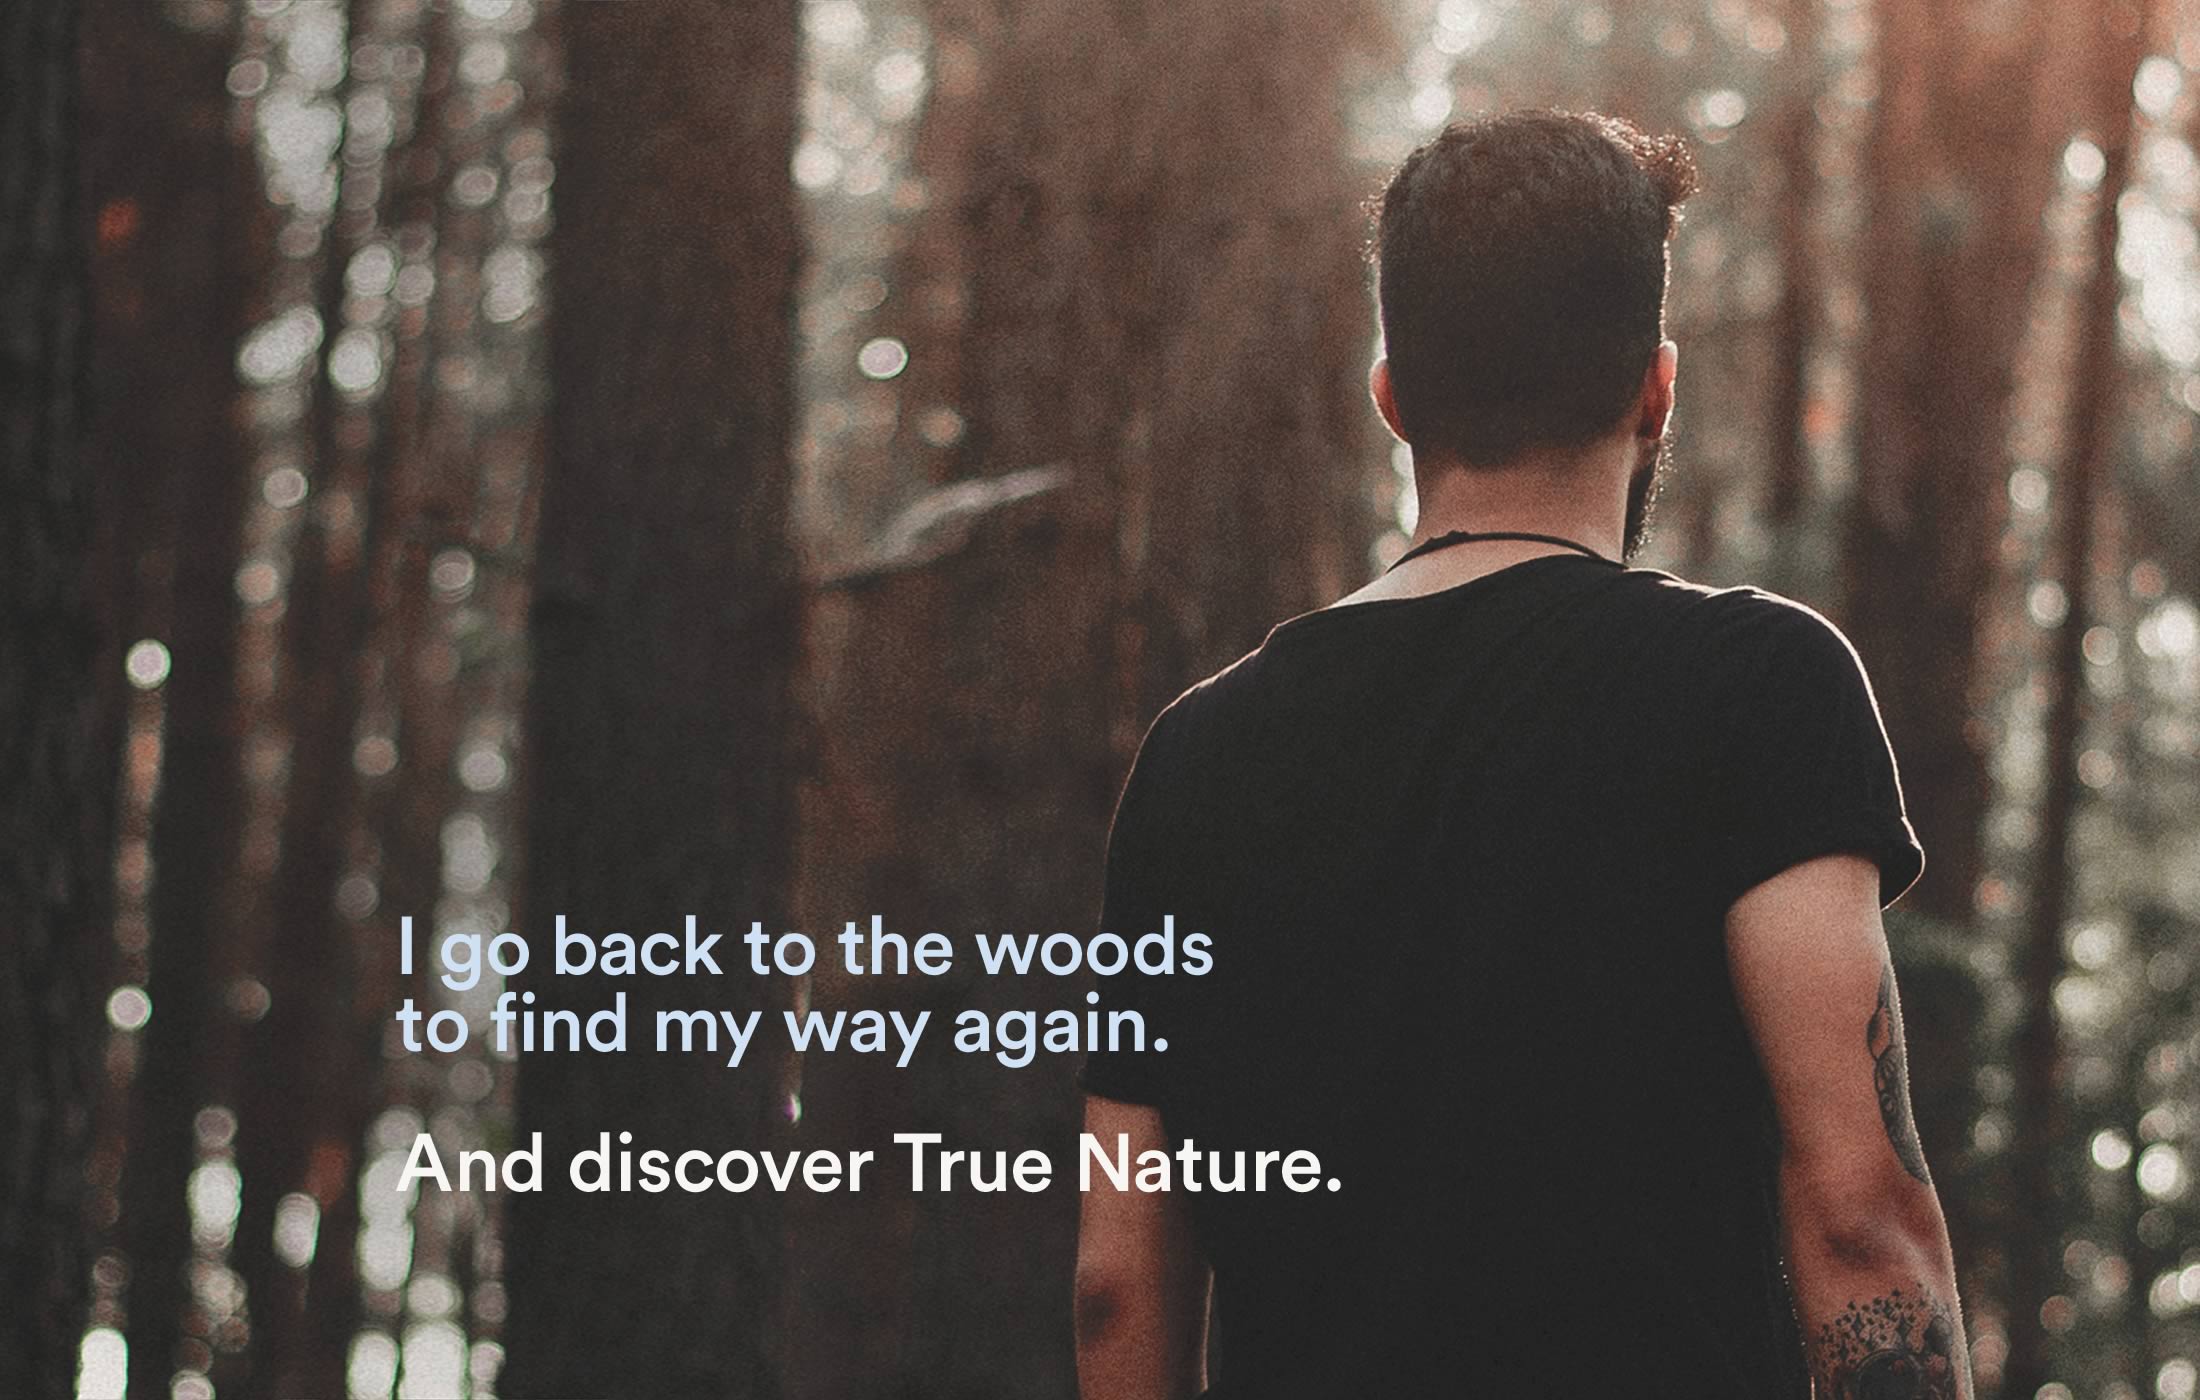 Image of a young adult entering a forest, captioned as 'I go back to the woods to find my way again.'